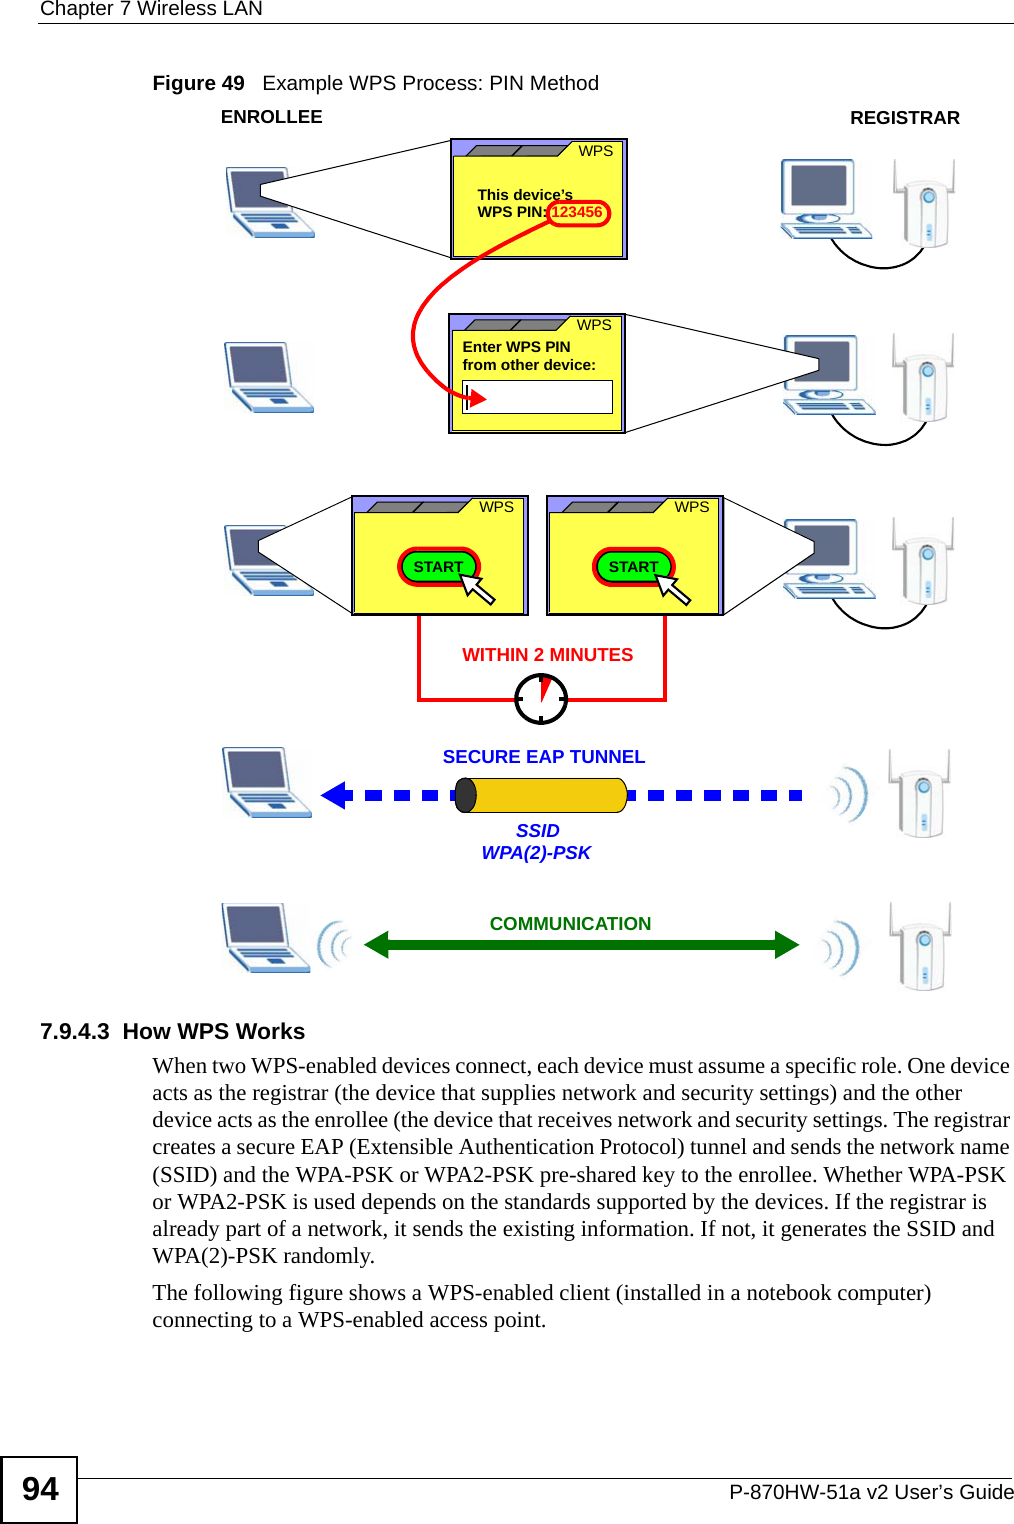 Chapter 7 Wireless LANP-870HW-51a v2 User’s Guide94Figure 49   Example WPS Process: PIN Method7.9.4.3  How WPS WorksWhen two WPS-enabled devices connect, each device must assume a specific role. One device acts as the registrar (the device that supplies network and security settings) and the other device acts as the enrollee (the device that receives network and security settings. The registrar creates a secure EAP (Extensible Authentication Protocol) tunnel and sends the network name (SSID) and the WPA-PSK or WPA2-PSK pre-shared key to the enrollee. Whether WPA-PSK or WPA2-PSK is used depends on the standards supported by the devices. If the registrar is already part of a network, it sends the existing information. If not, it generates the SSID and WPA(2)-PSK randomly.The following figure shows a WPS-enabled client (installed in a notebook computer) connecting to a WPS-enabled access point.ENROLLEESECURE EAP TUNNELSSIDWPA(2)-PSKWITHIN 2 MINUTESCOMMUNICATIONThis device’s WPSEnter WPS PIN  WPSfrom other device: WPS PIN: 123456WPSSTARTWPSSTARTREGISTRAR